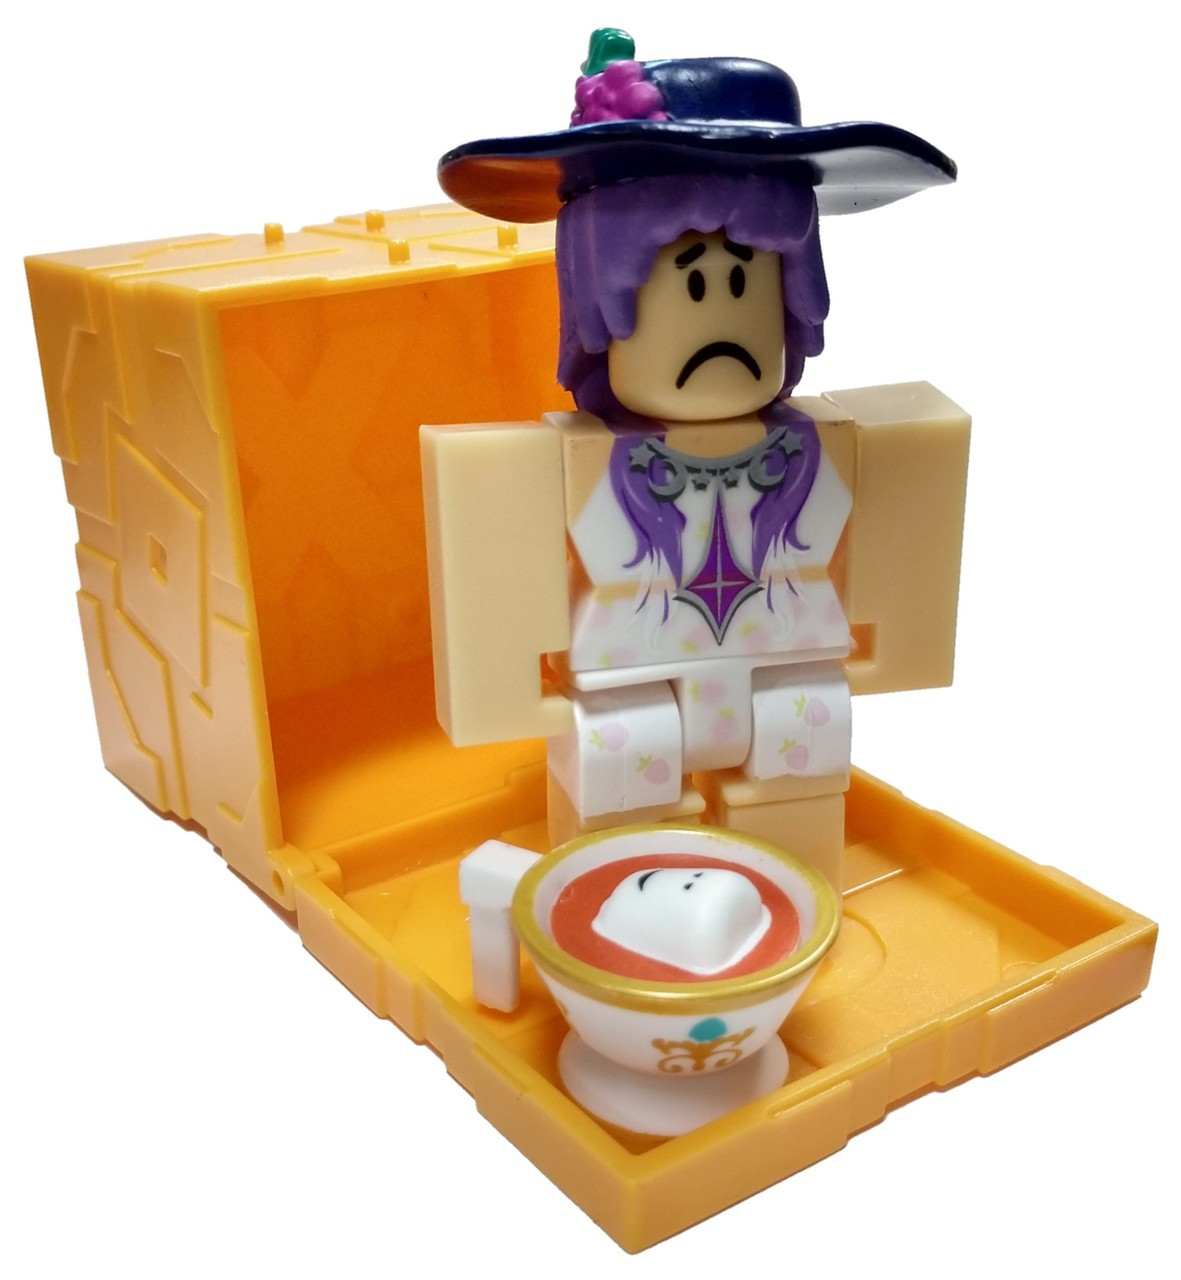 Series 5 Roblox Titanic Socialite Mini Figure With Gold Cube And Online Code Loose - roblox titanic codes 2018 november